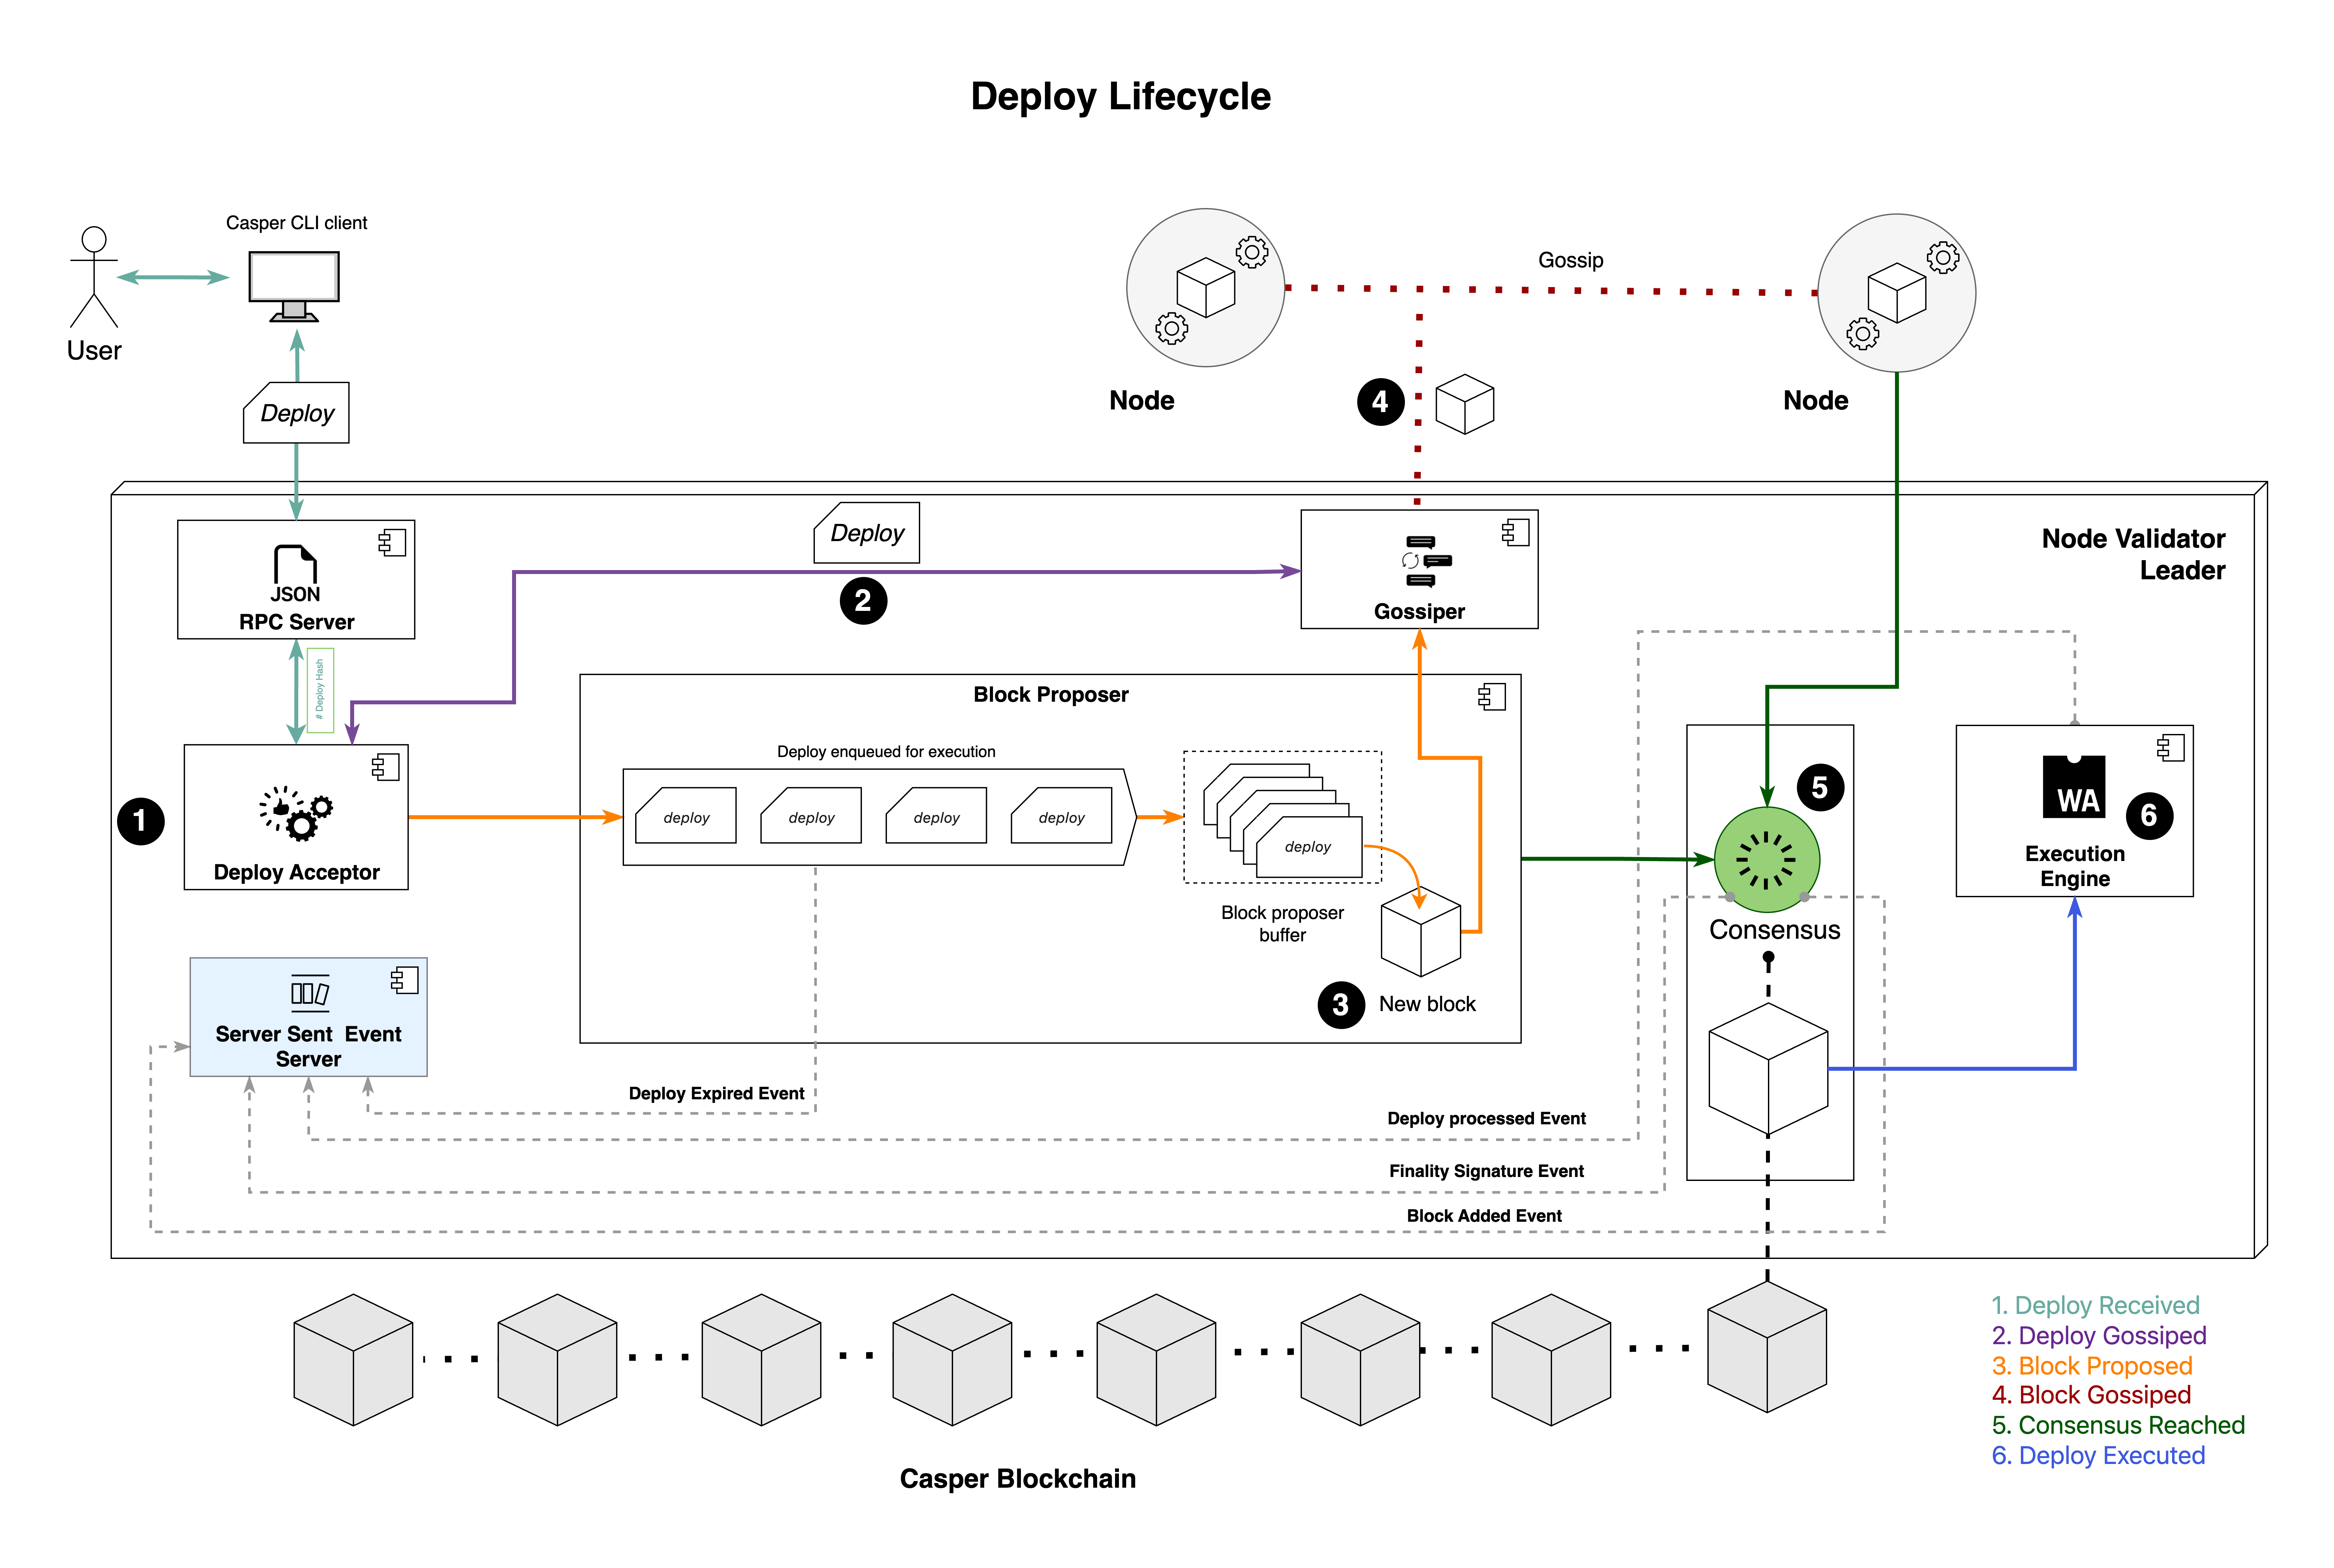 Image showing the deploy lifecycle